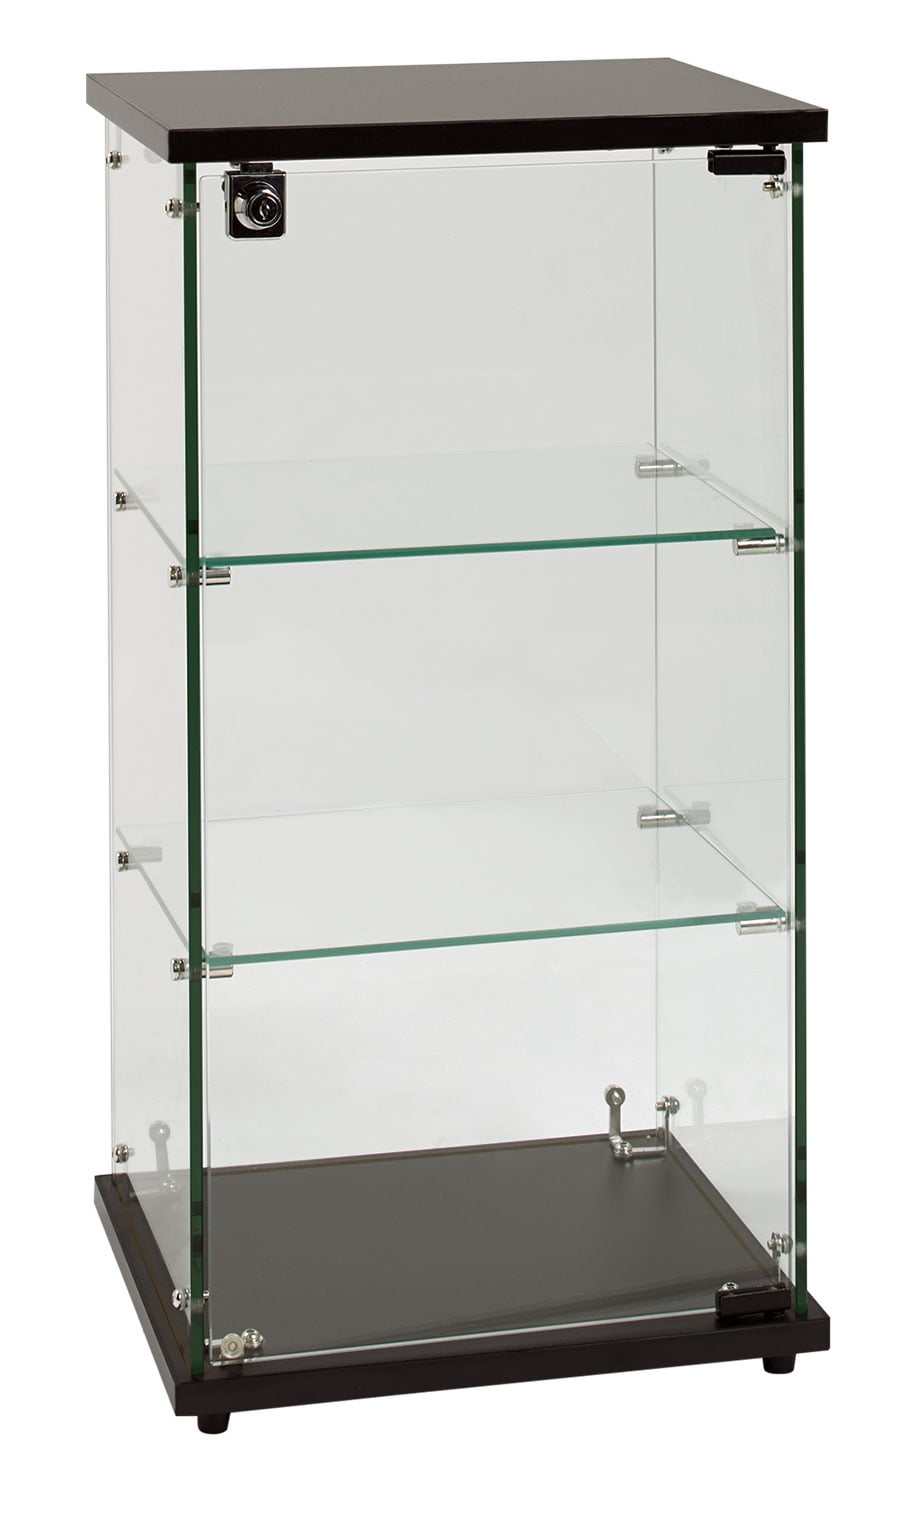 47"L x 26"W x 15"H Table Top Acrylic Display case with black frame Stand Cabinet